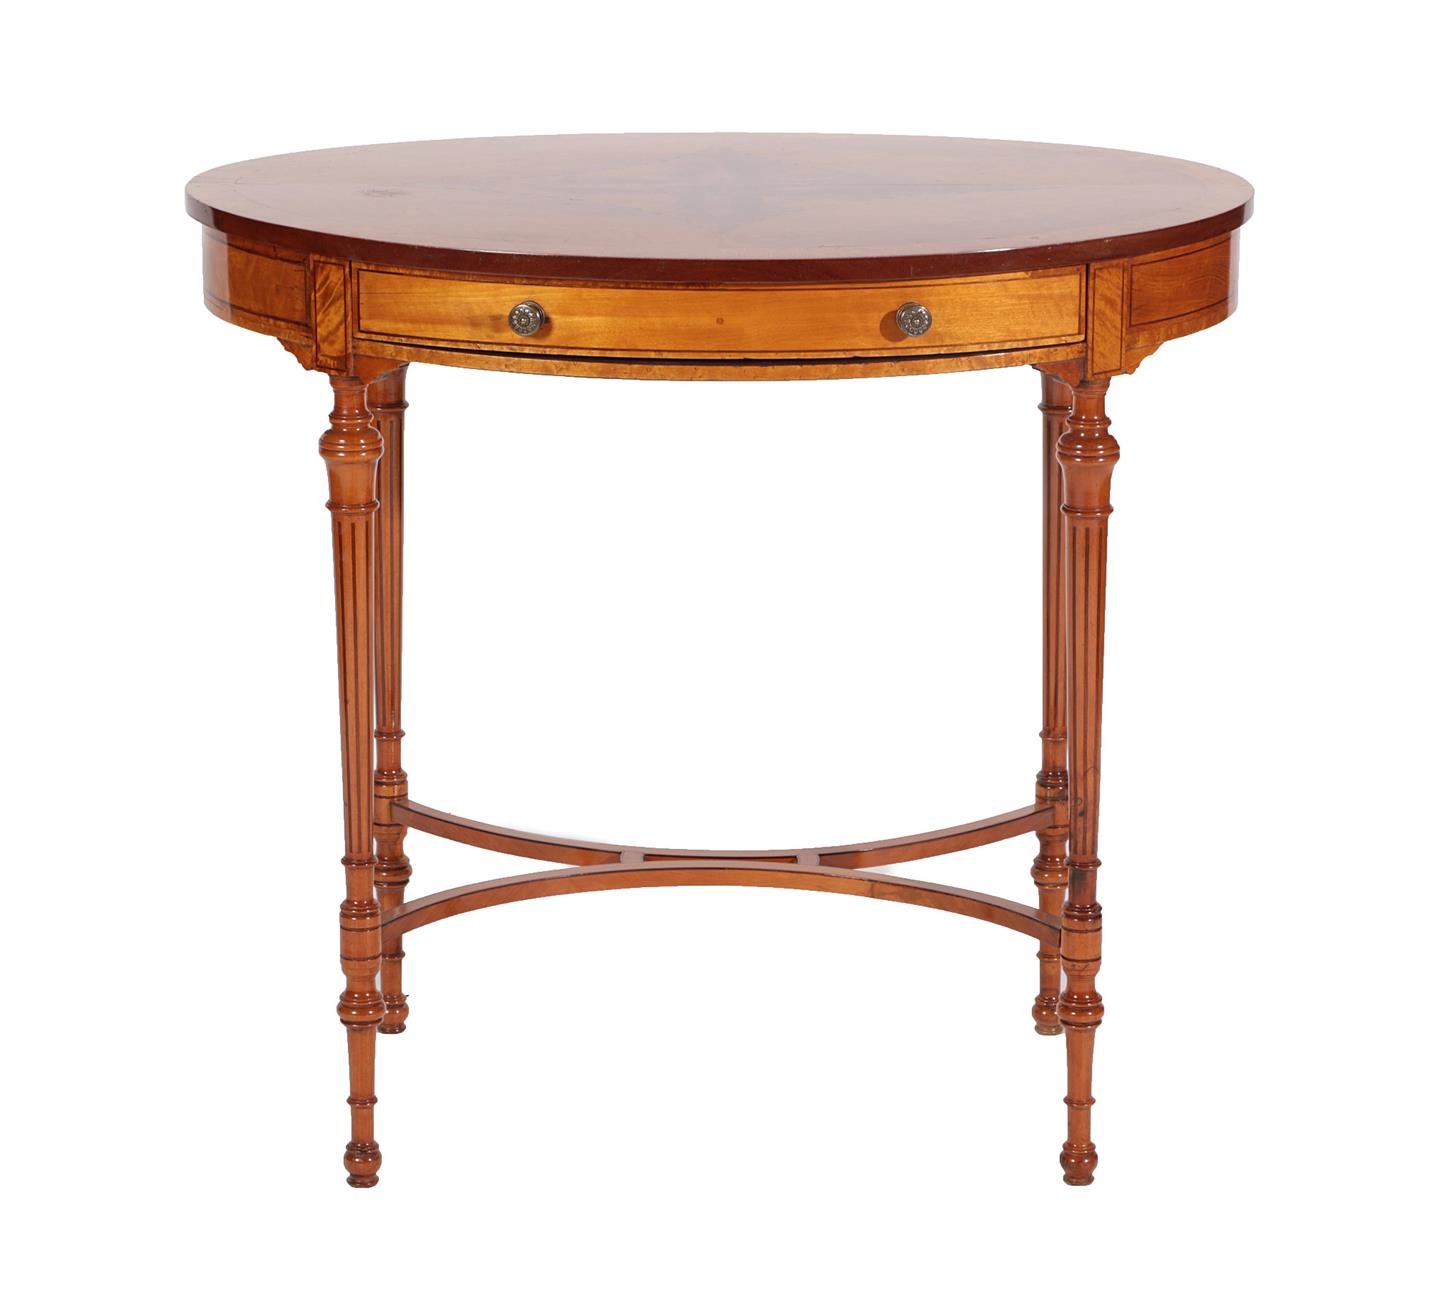 Lot 537 - A Late Victorian Satinwood, Crossbanded and Marquetry Inlaid Oval Occasional Table, late 19th...